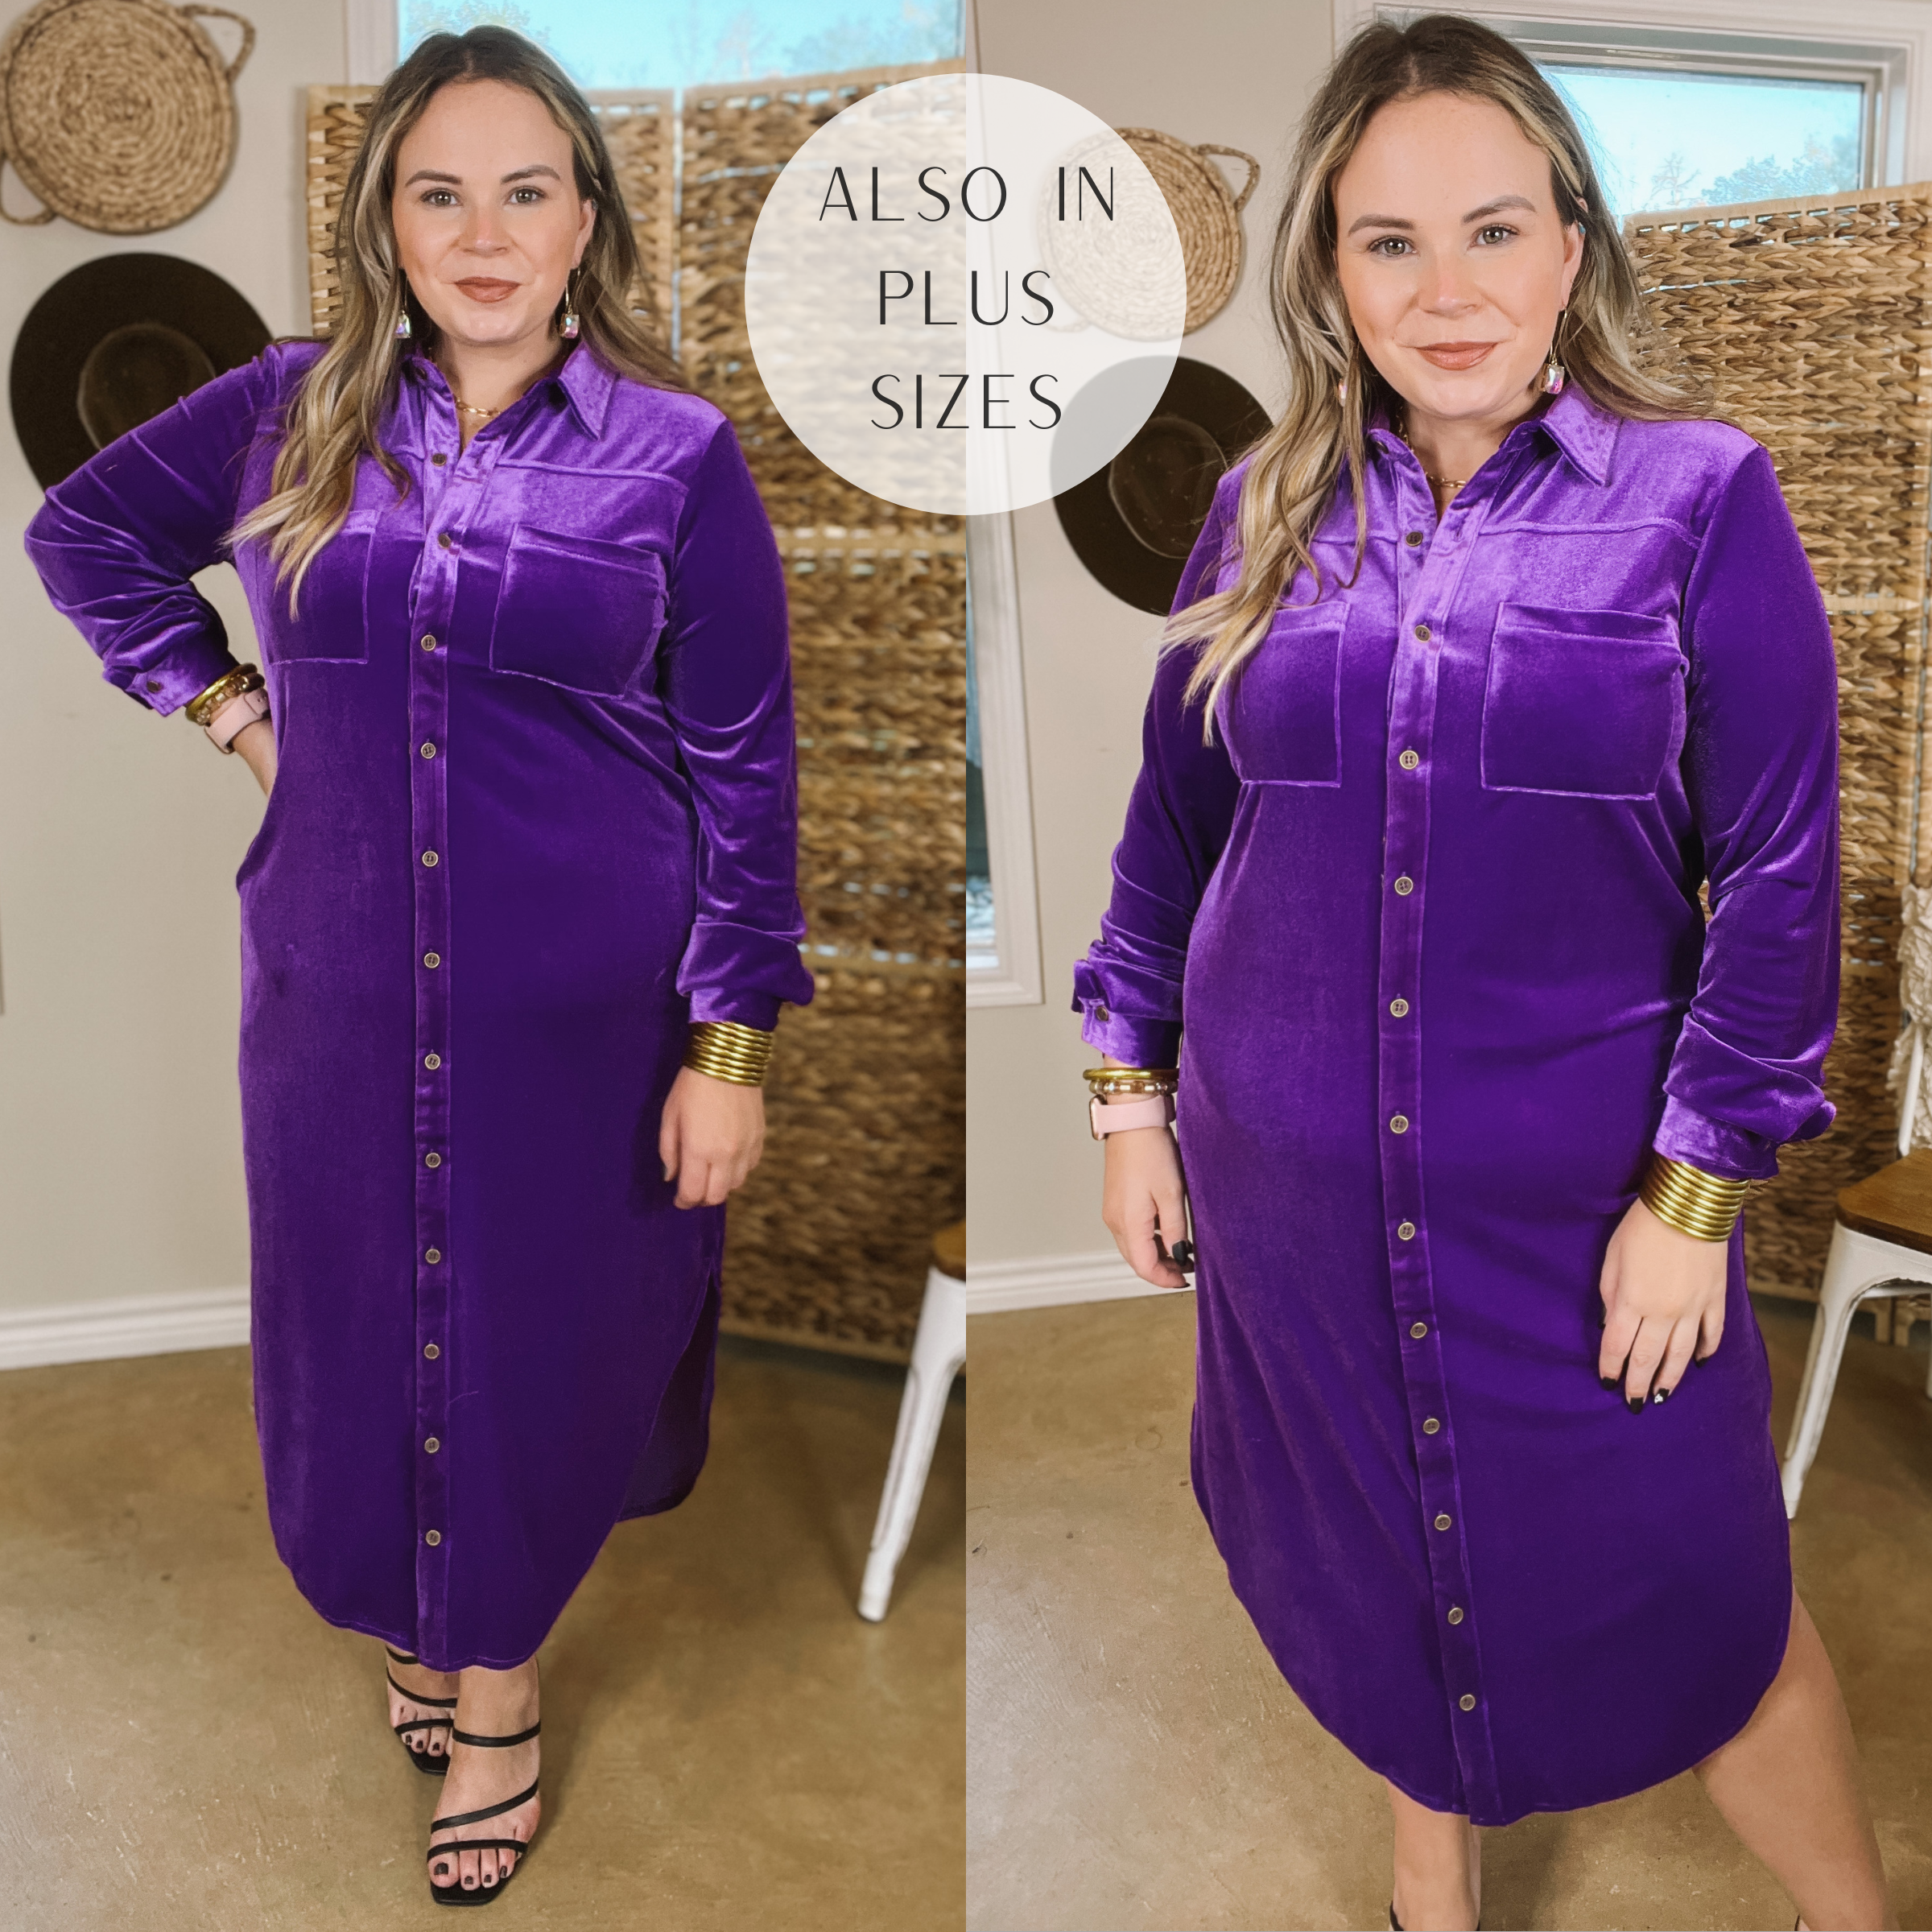 Model is wearing a button up long sleeve midi dress that is velvet. Model has this purple dress paired with black strappy heels and gold jewelry.